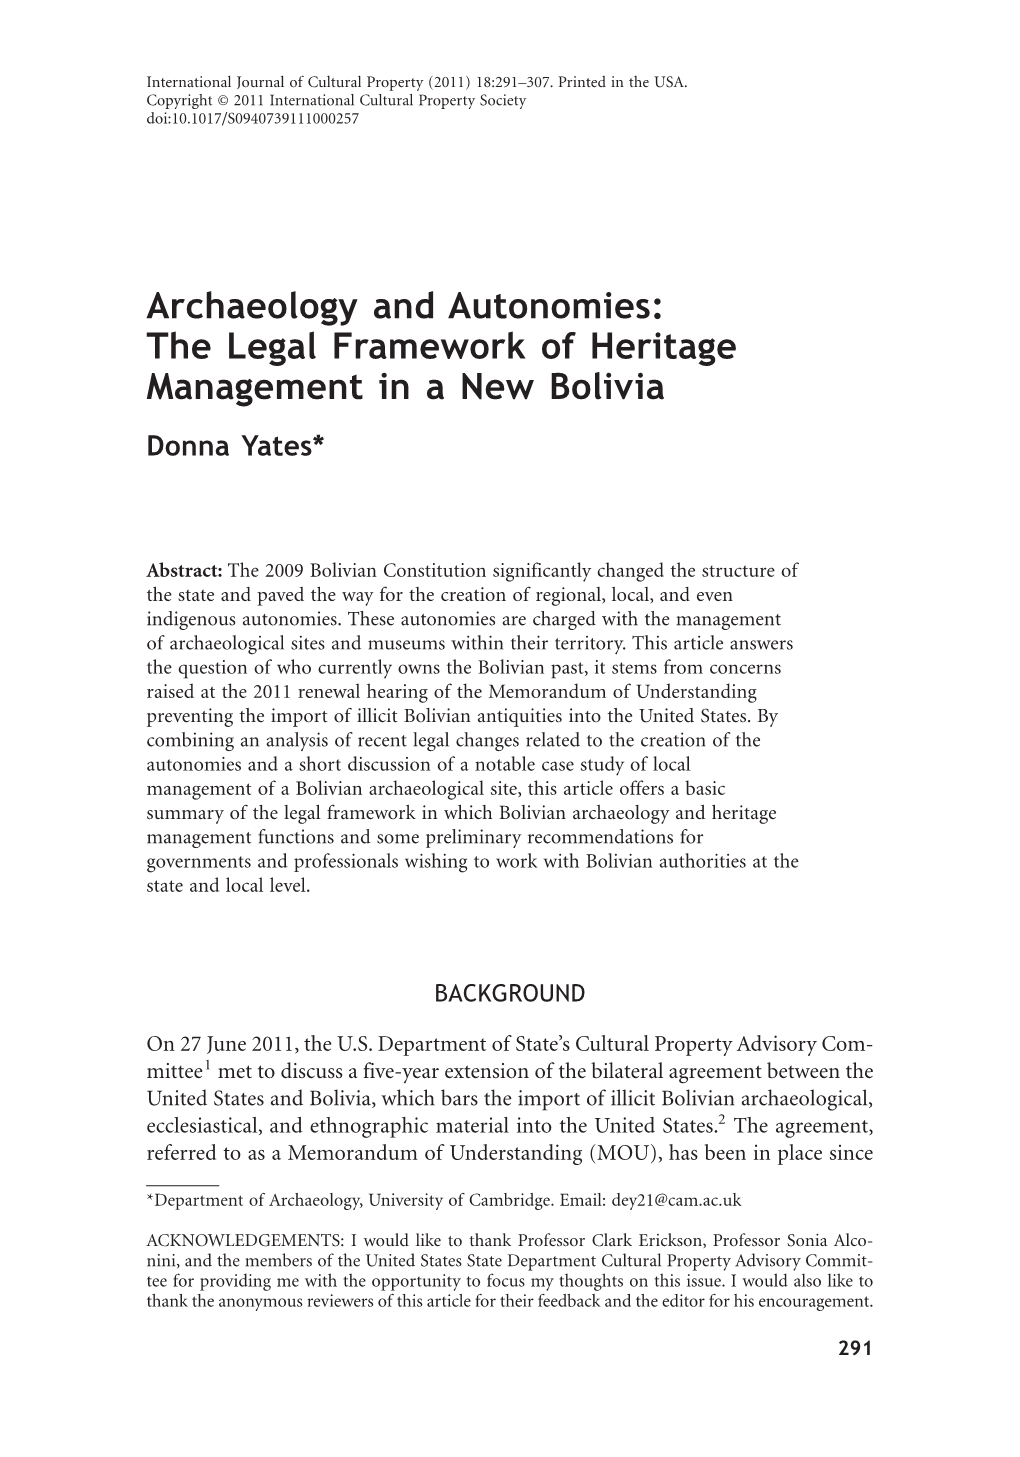 Archaeology and Autonomies: the Legal Framework of Heritage Management in a New Bolivia Donna Yates*